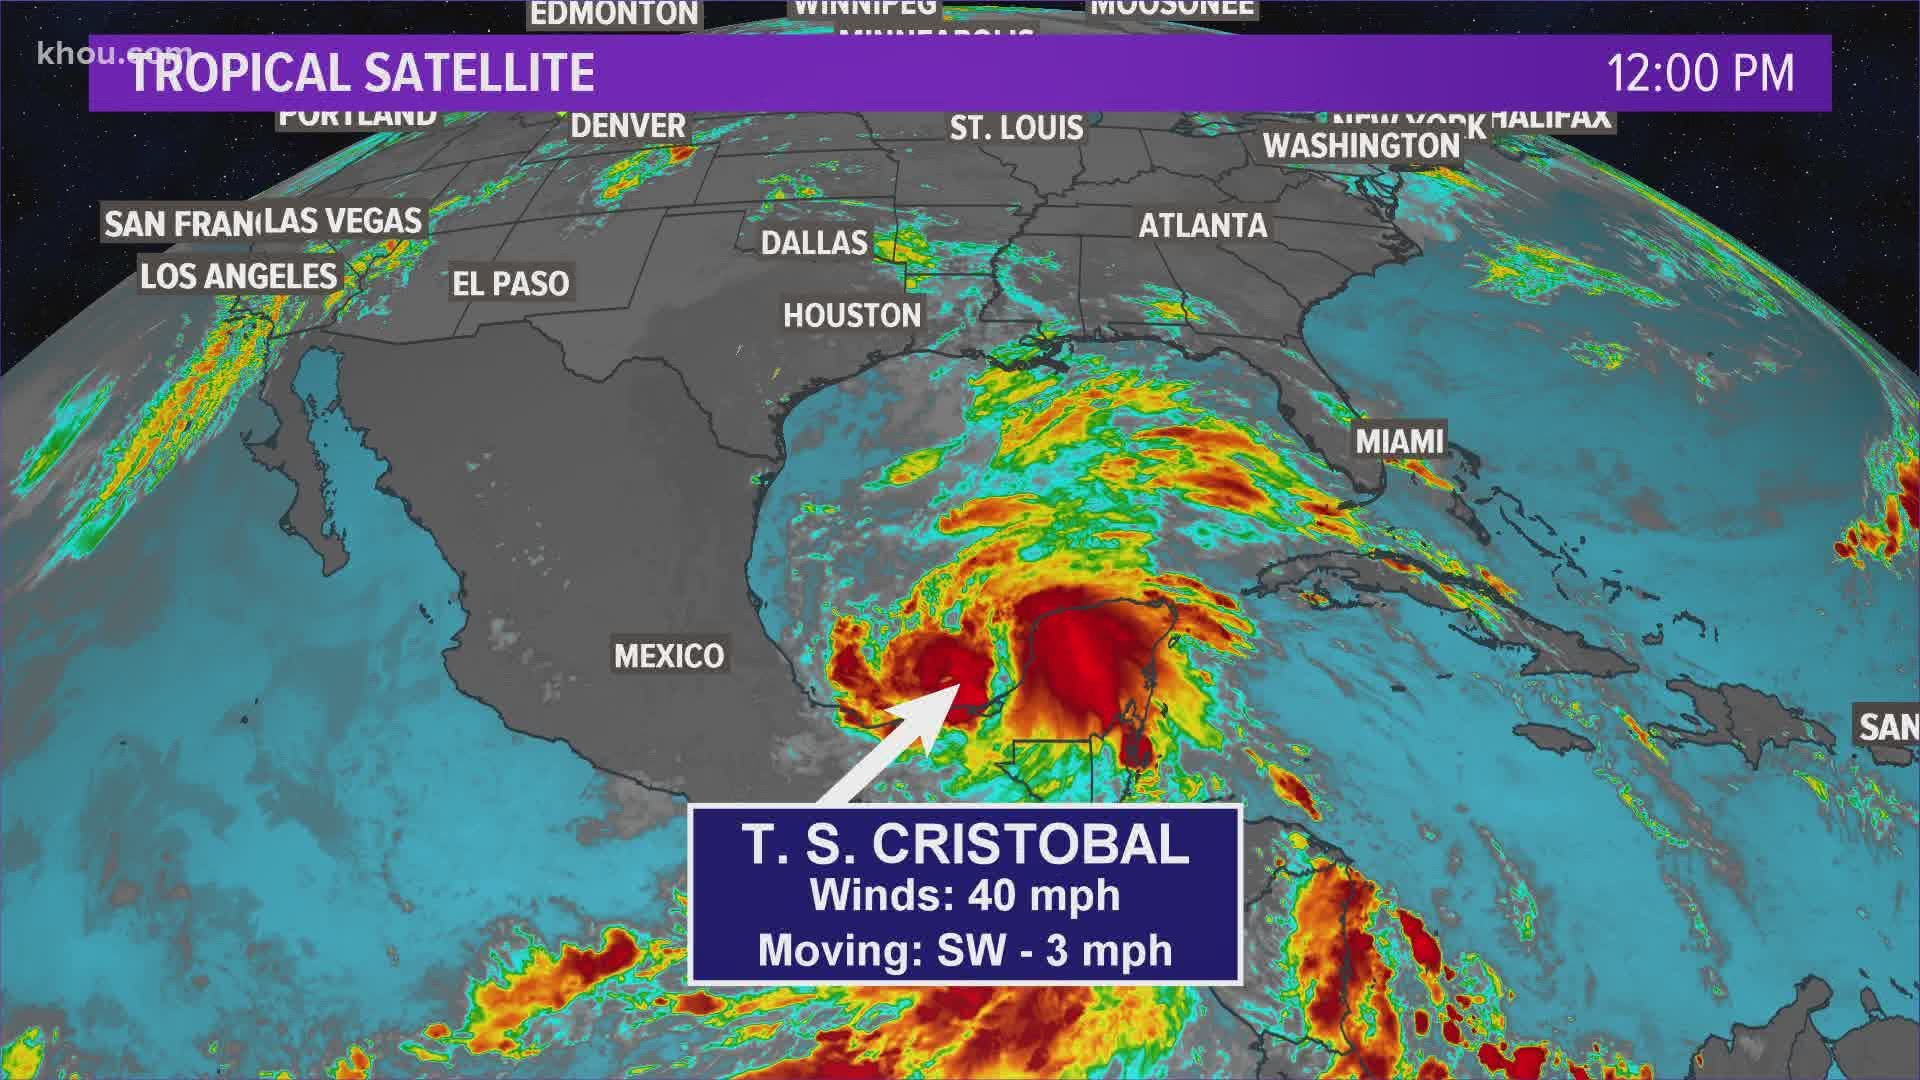 Stay with the KHOU 11 Weather Team as they keep a close eye on Cristobal and what impacts it could have on Southeast Texas.